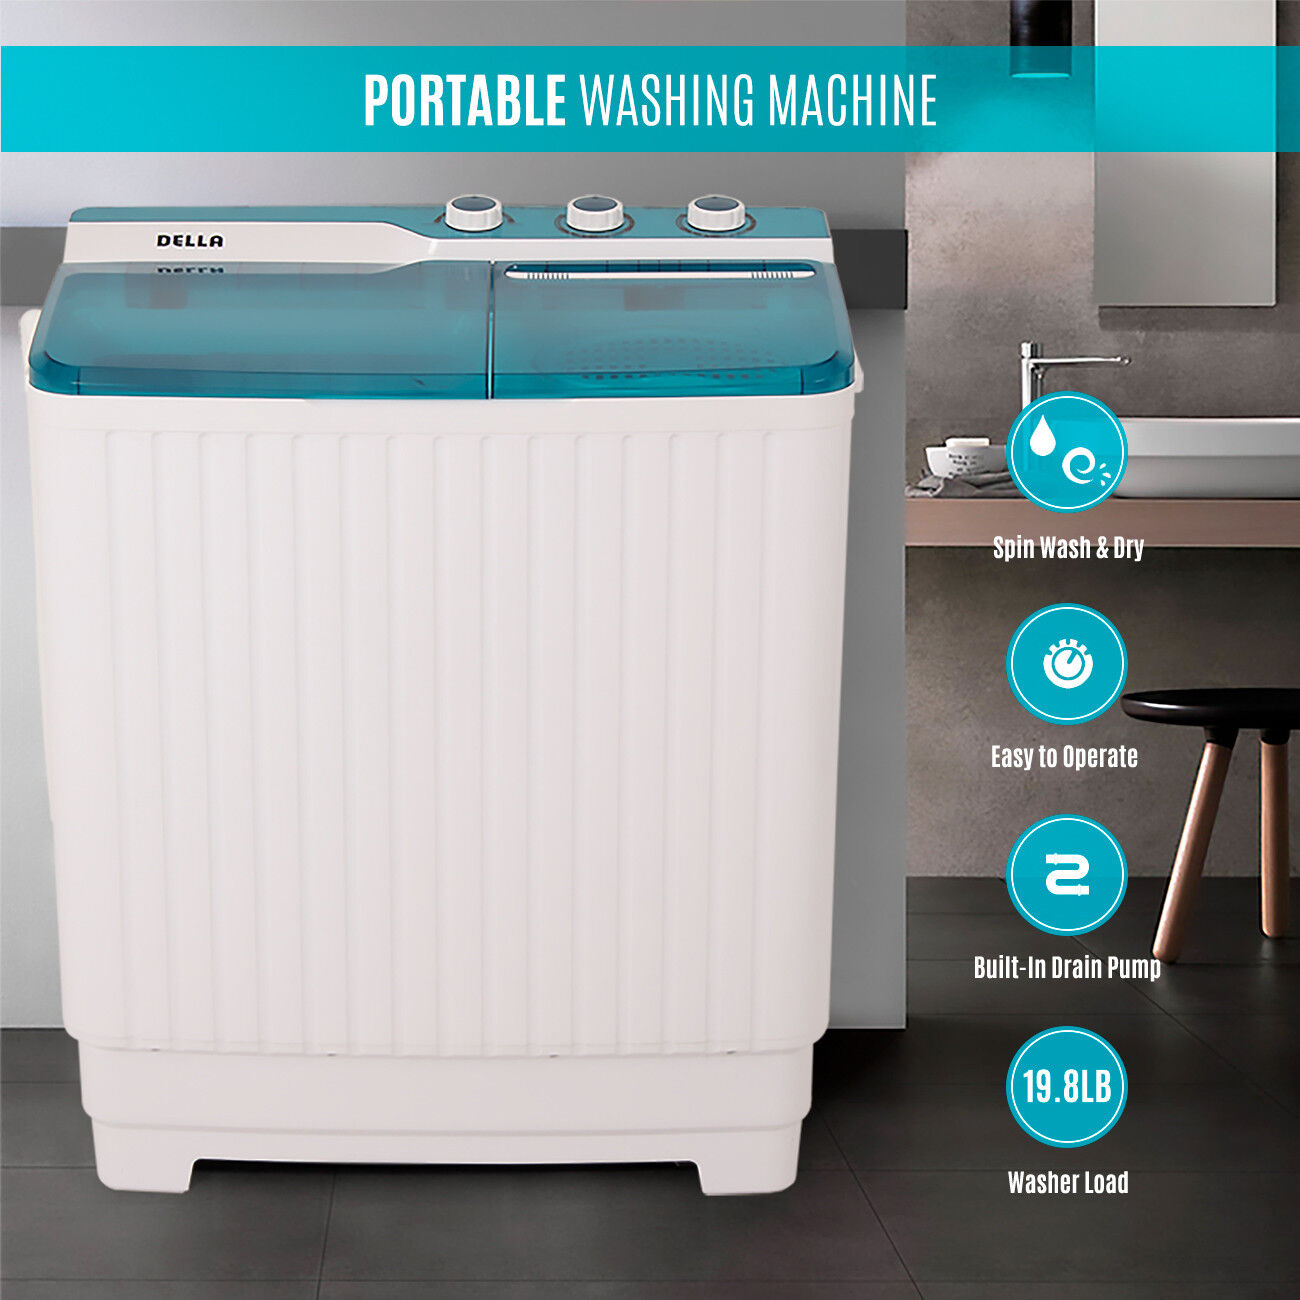 Portable Compact Twin Washing Machine Washer Spin & Dry Cycle 9KG w/ DRAIN PUMP